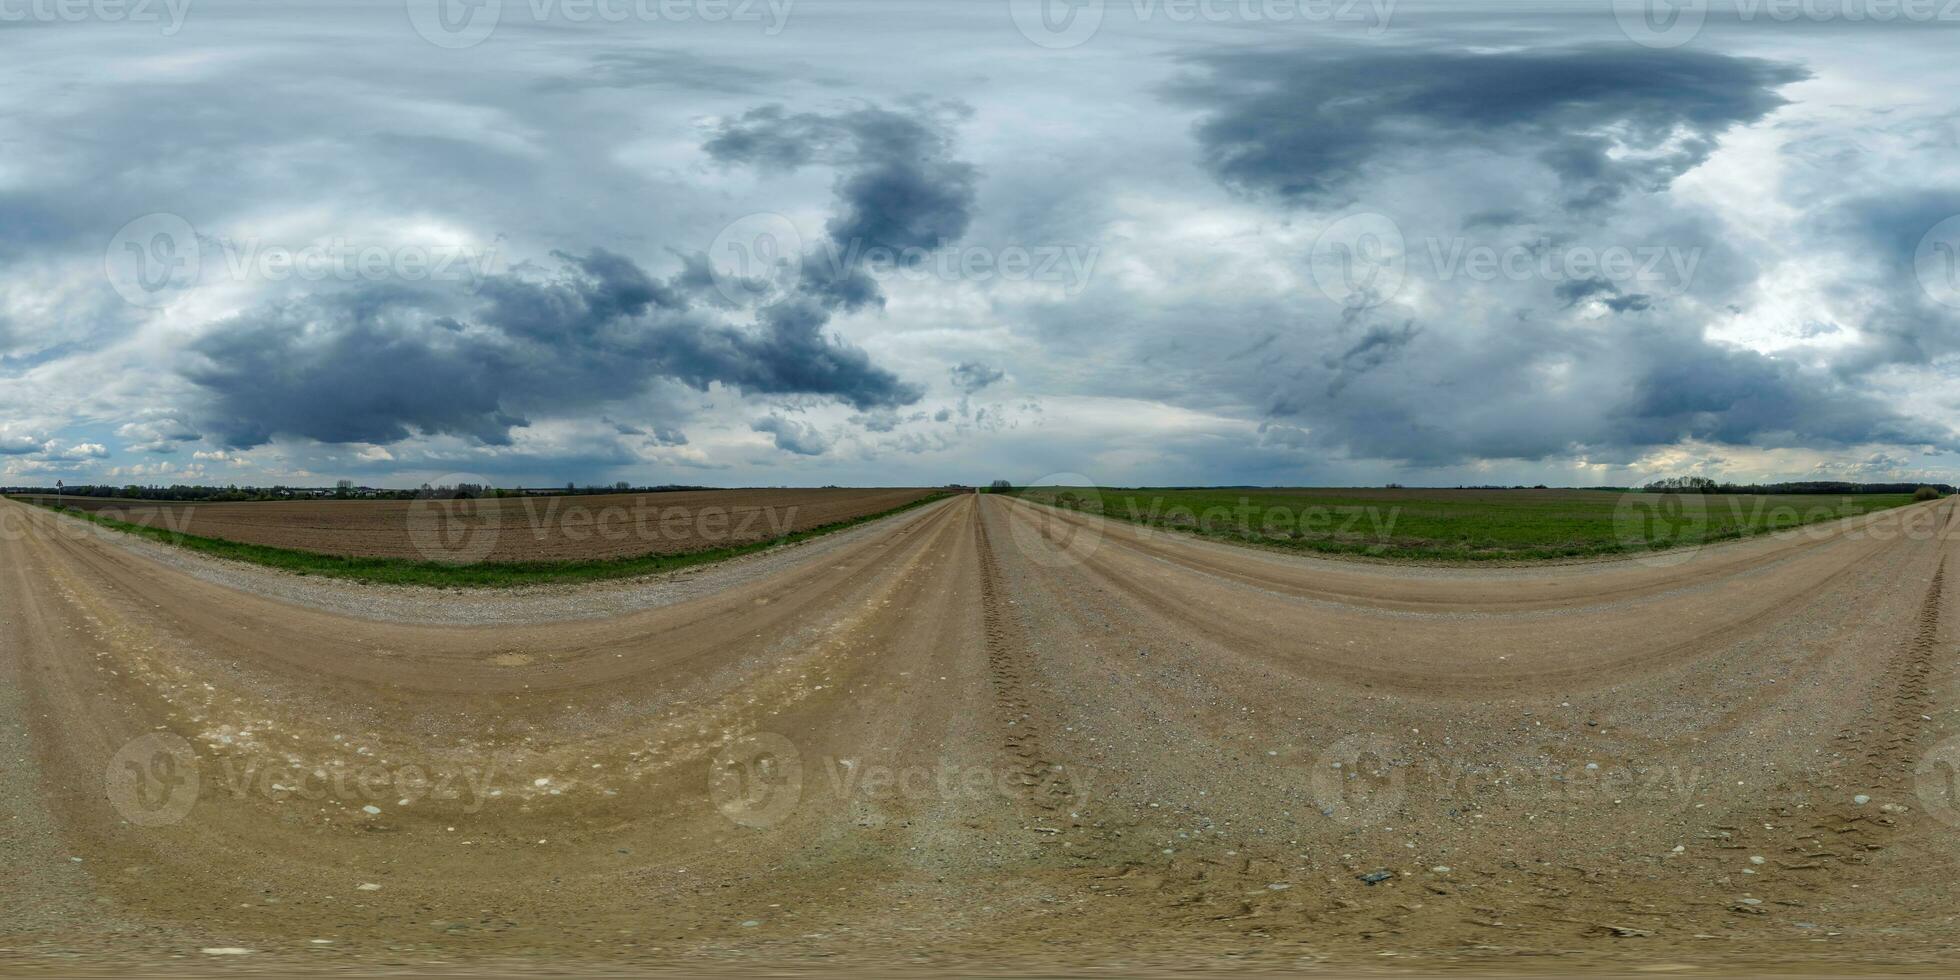 evening 360 hdri panorama on gravel road with clouds on overcast rain sky before storm in equirectangular spherical seamless projection, use as sky replacement in drone panoramas, game development photo